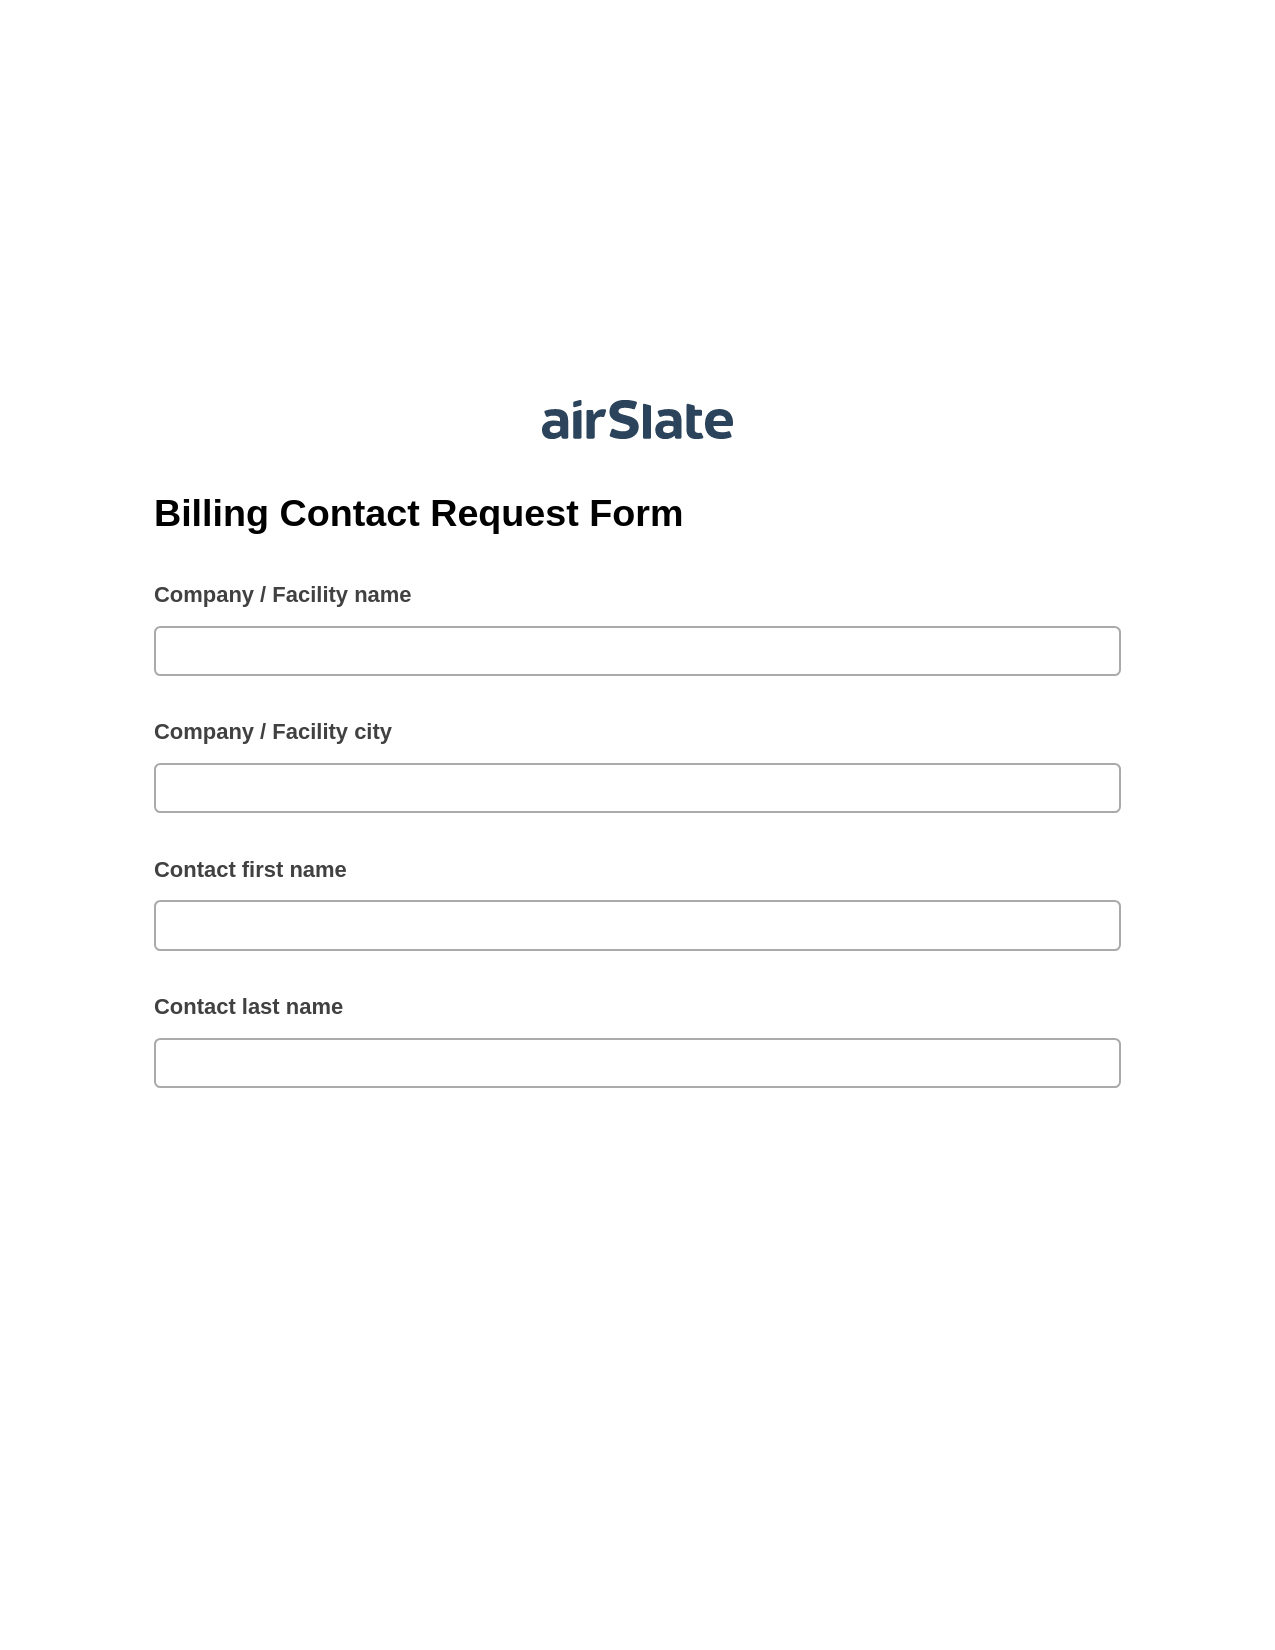 Billing Contact Request Form Pre-fill Dropdown from Airtable, Lock the slate bot, Google Drive Bot